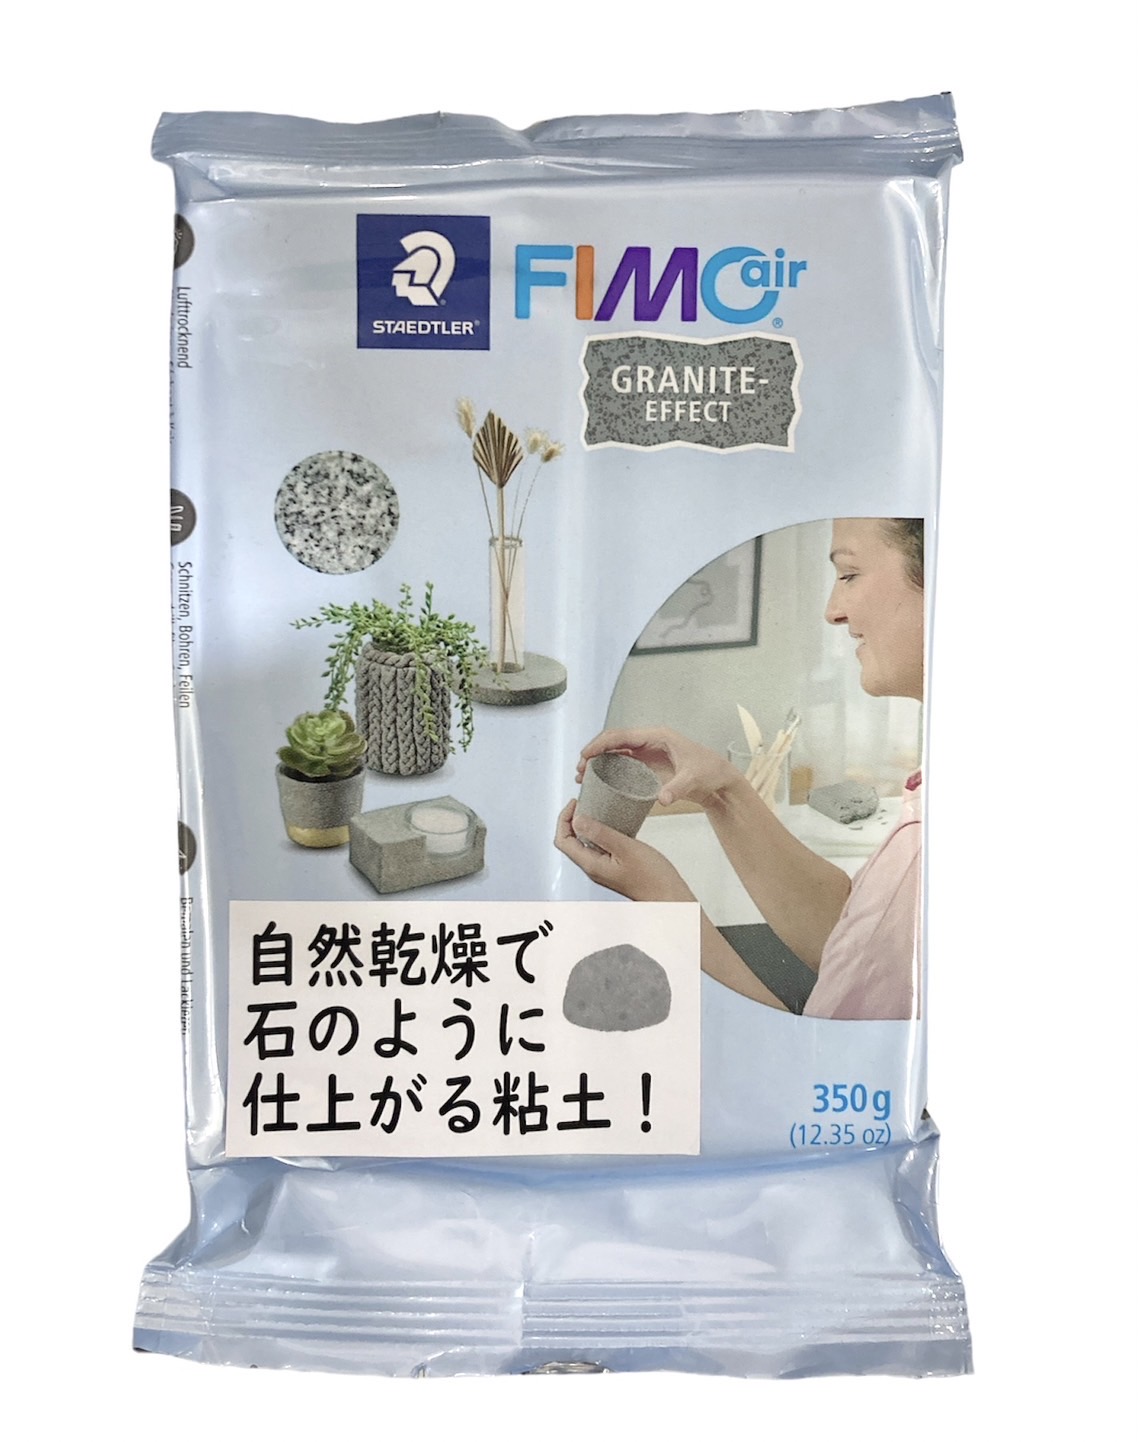 fimo air gla Night 1 sack 300g stone become clay ste gong -8150-G... construction 